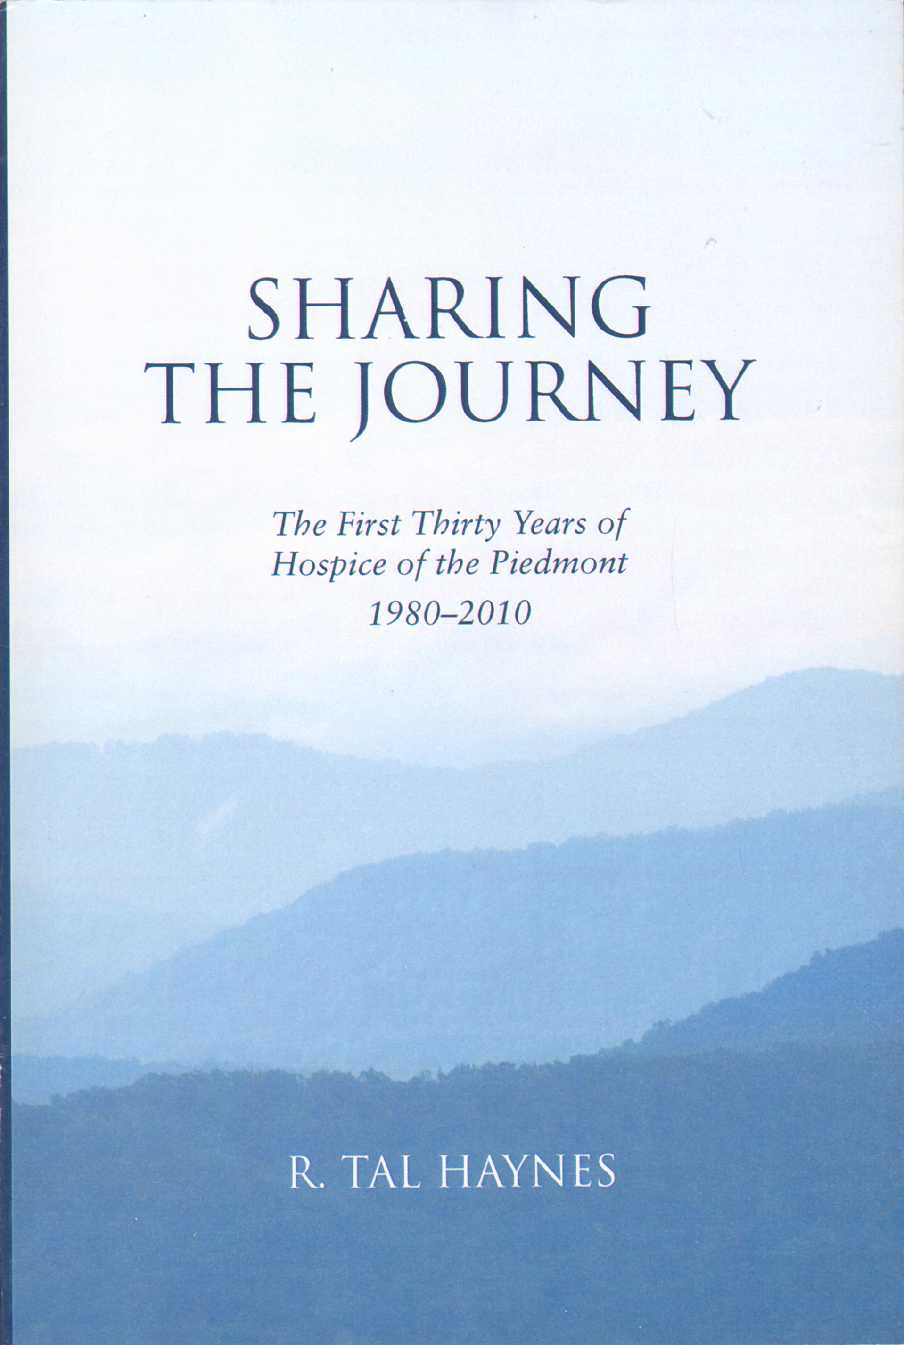 Image for SHARING THE JOURNEY The First 30 Years of Hospice of the Piedmont, 1980-2010